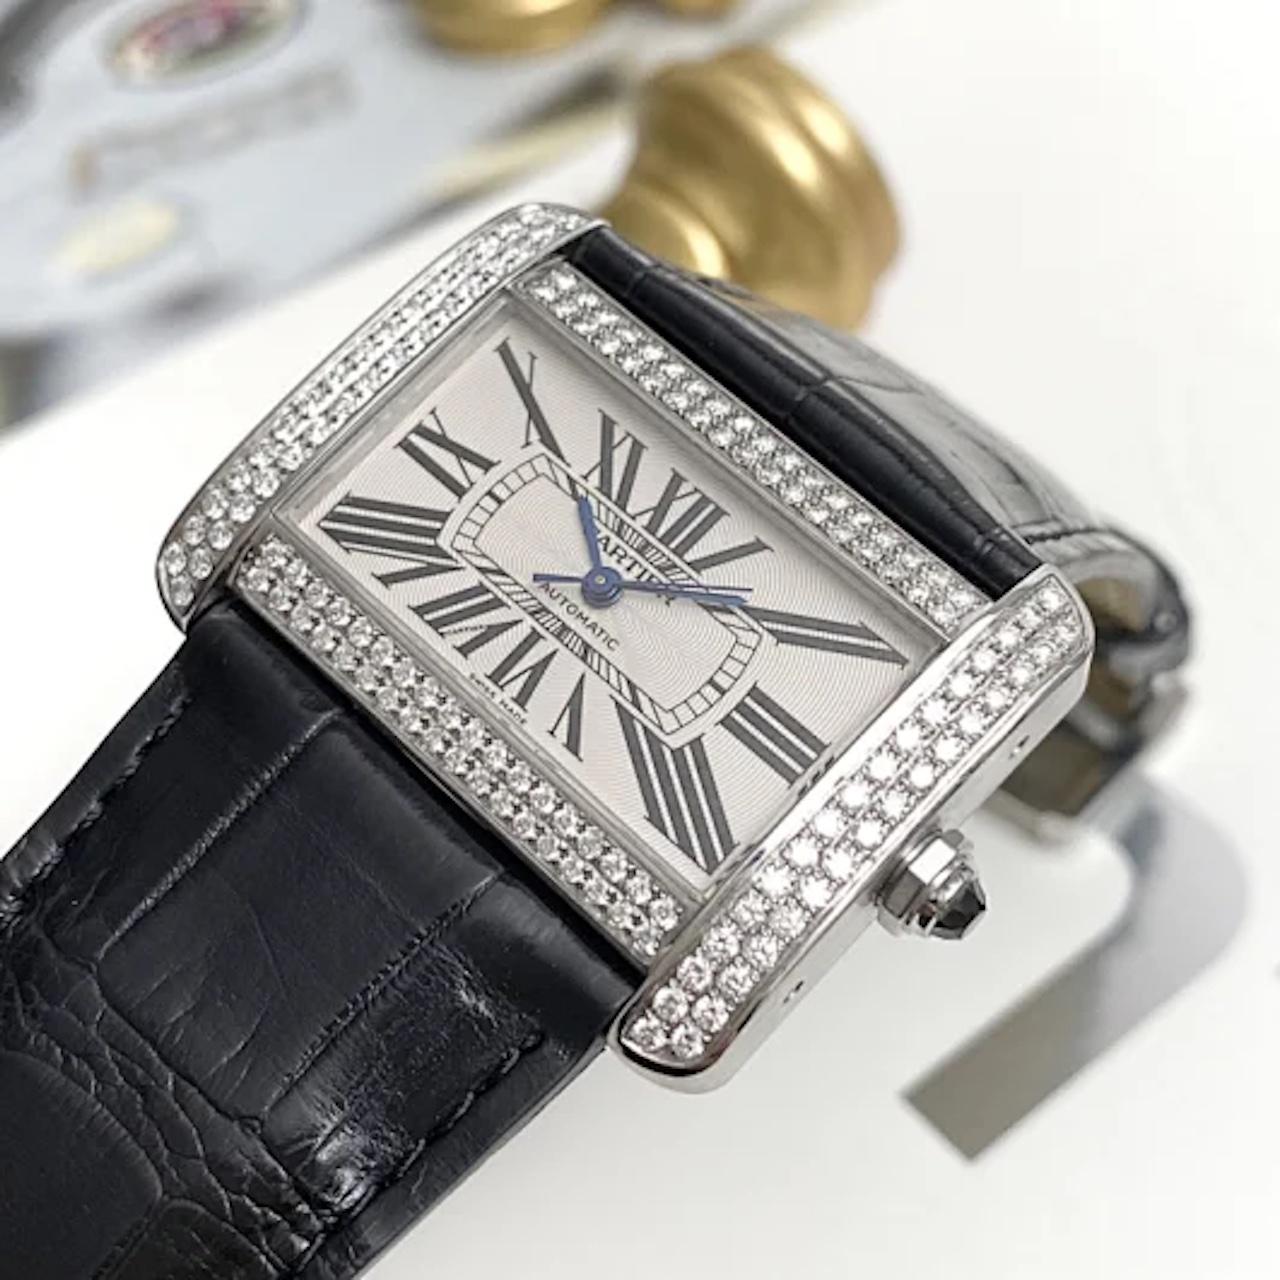 The Tank Divan is a piece that marks a short period in Cartier’s history. The Tank Divan is a watch that represents all of Cartier’s values as a high-end watch maker and delivers a unique style, whilst maintaining a classically Cartier aesthetic.